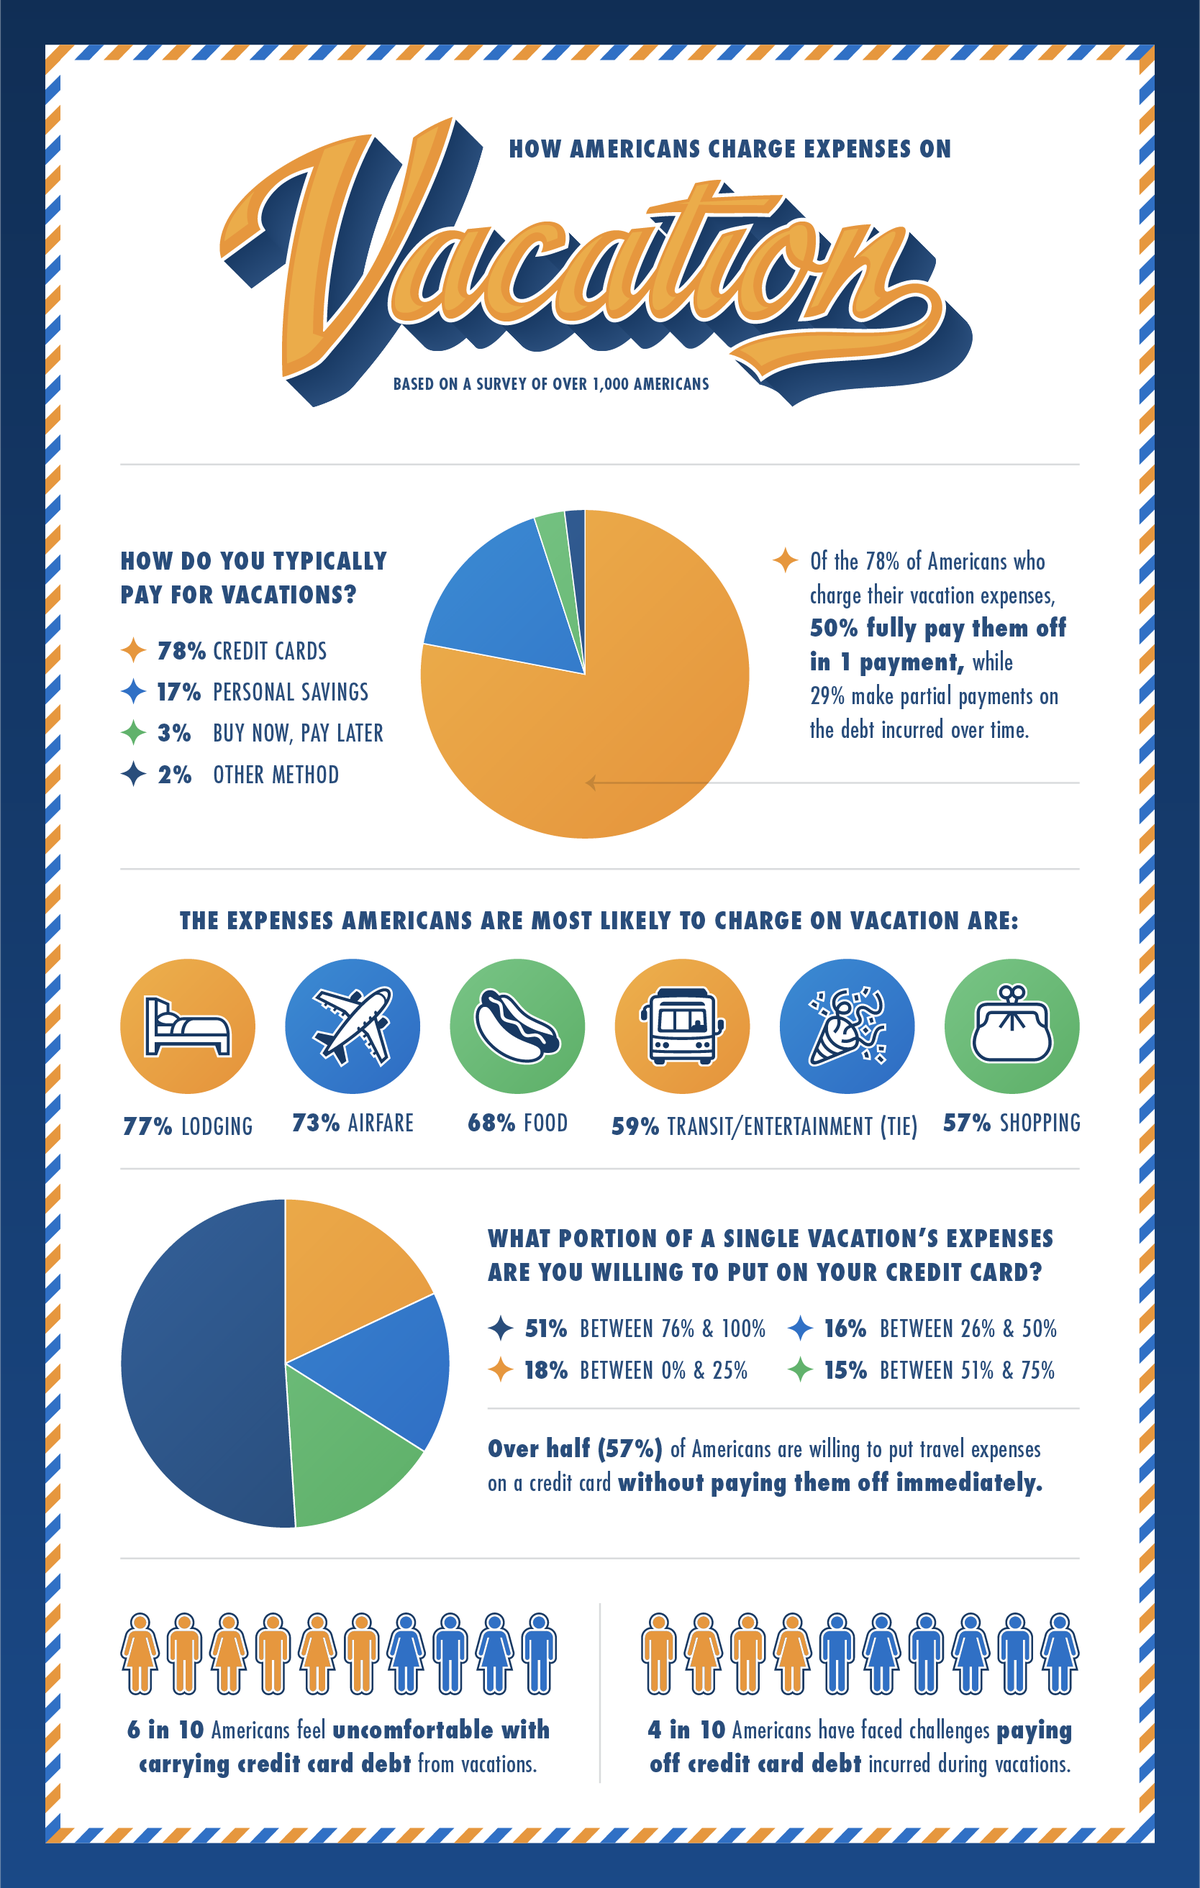 An infographic showing survey insights about how Americans use credit cards to pay for vacations